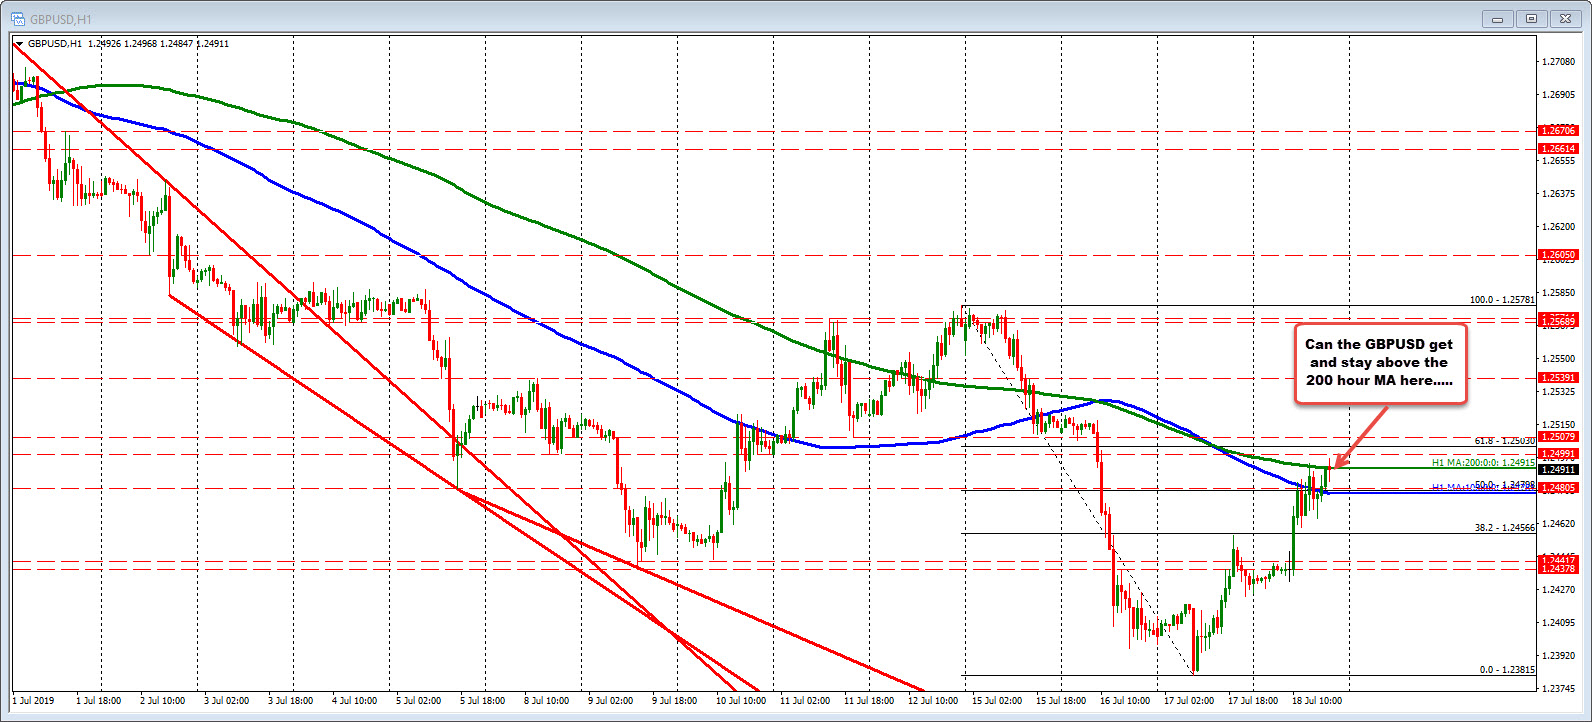 GBPUSD on the hourly chart...